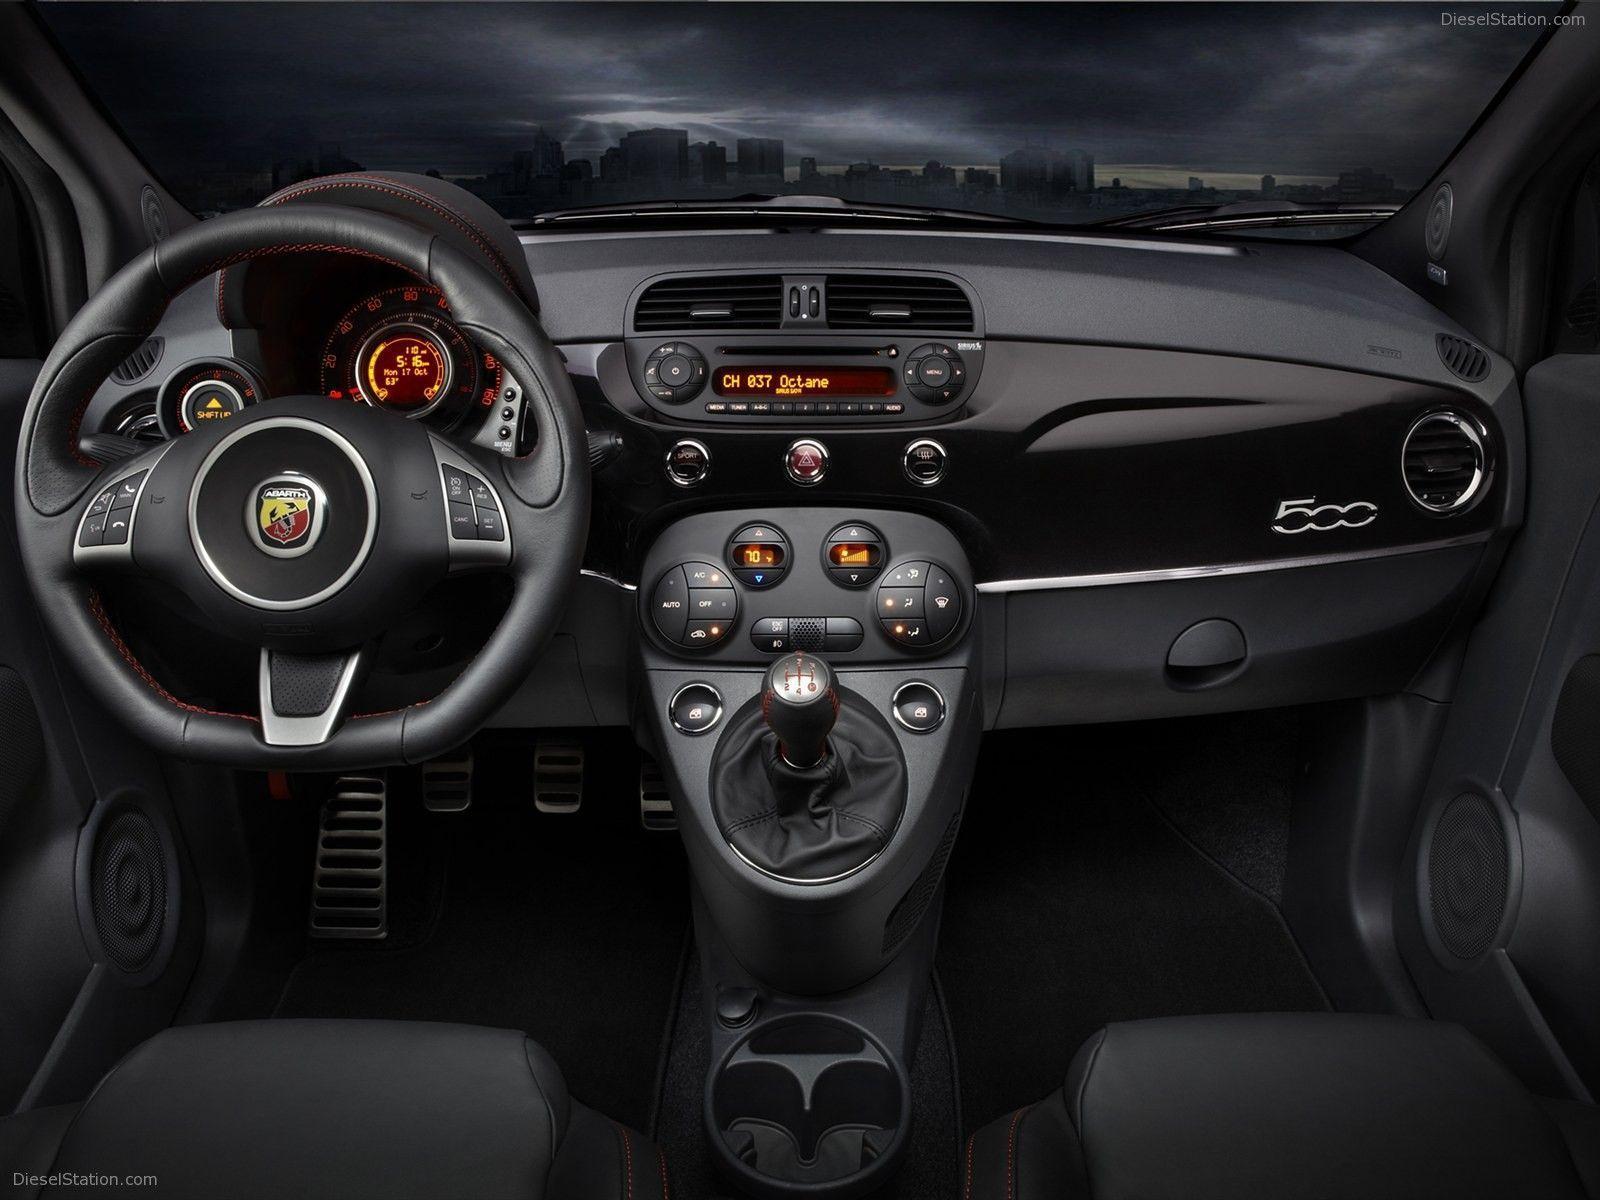 Fiat 500 Abarth 2012 Exotic Car Wallpaper of 58, Diesel Station